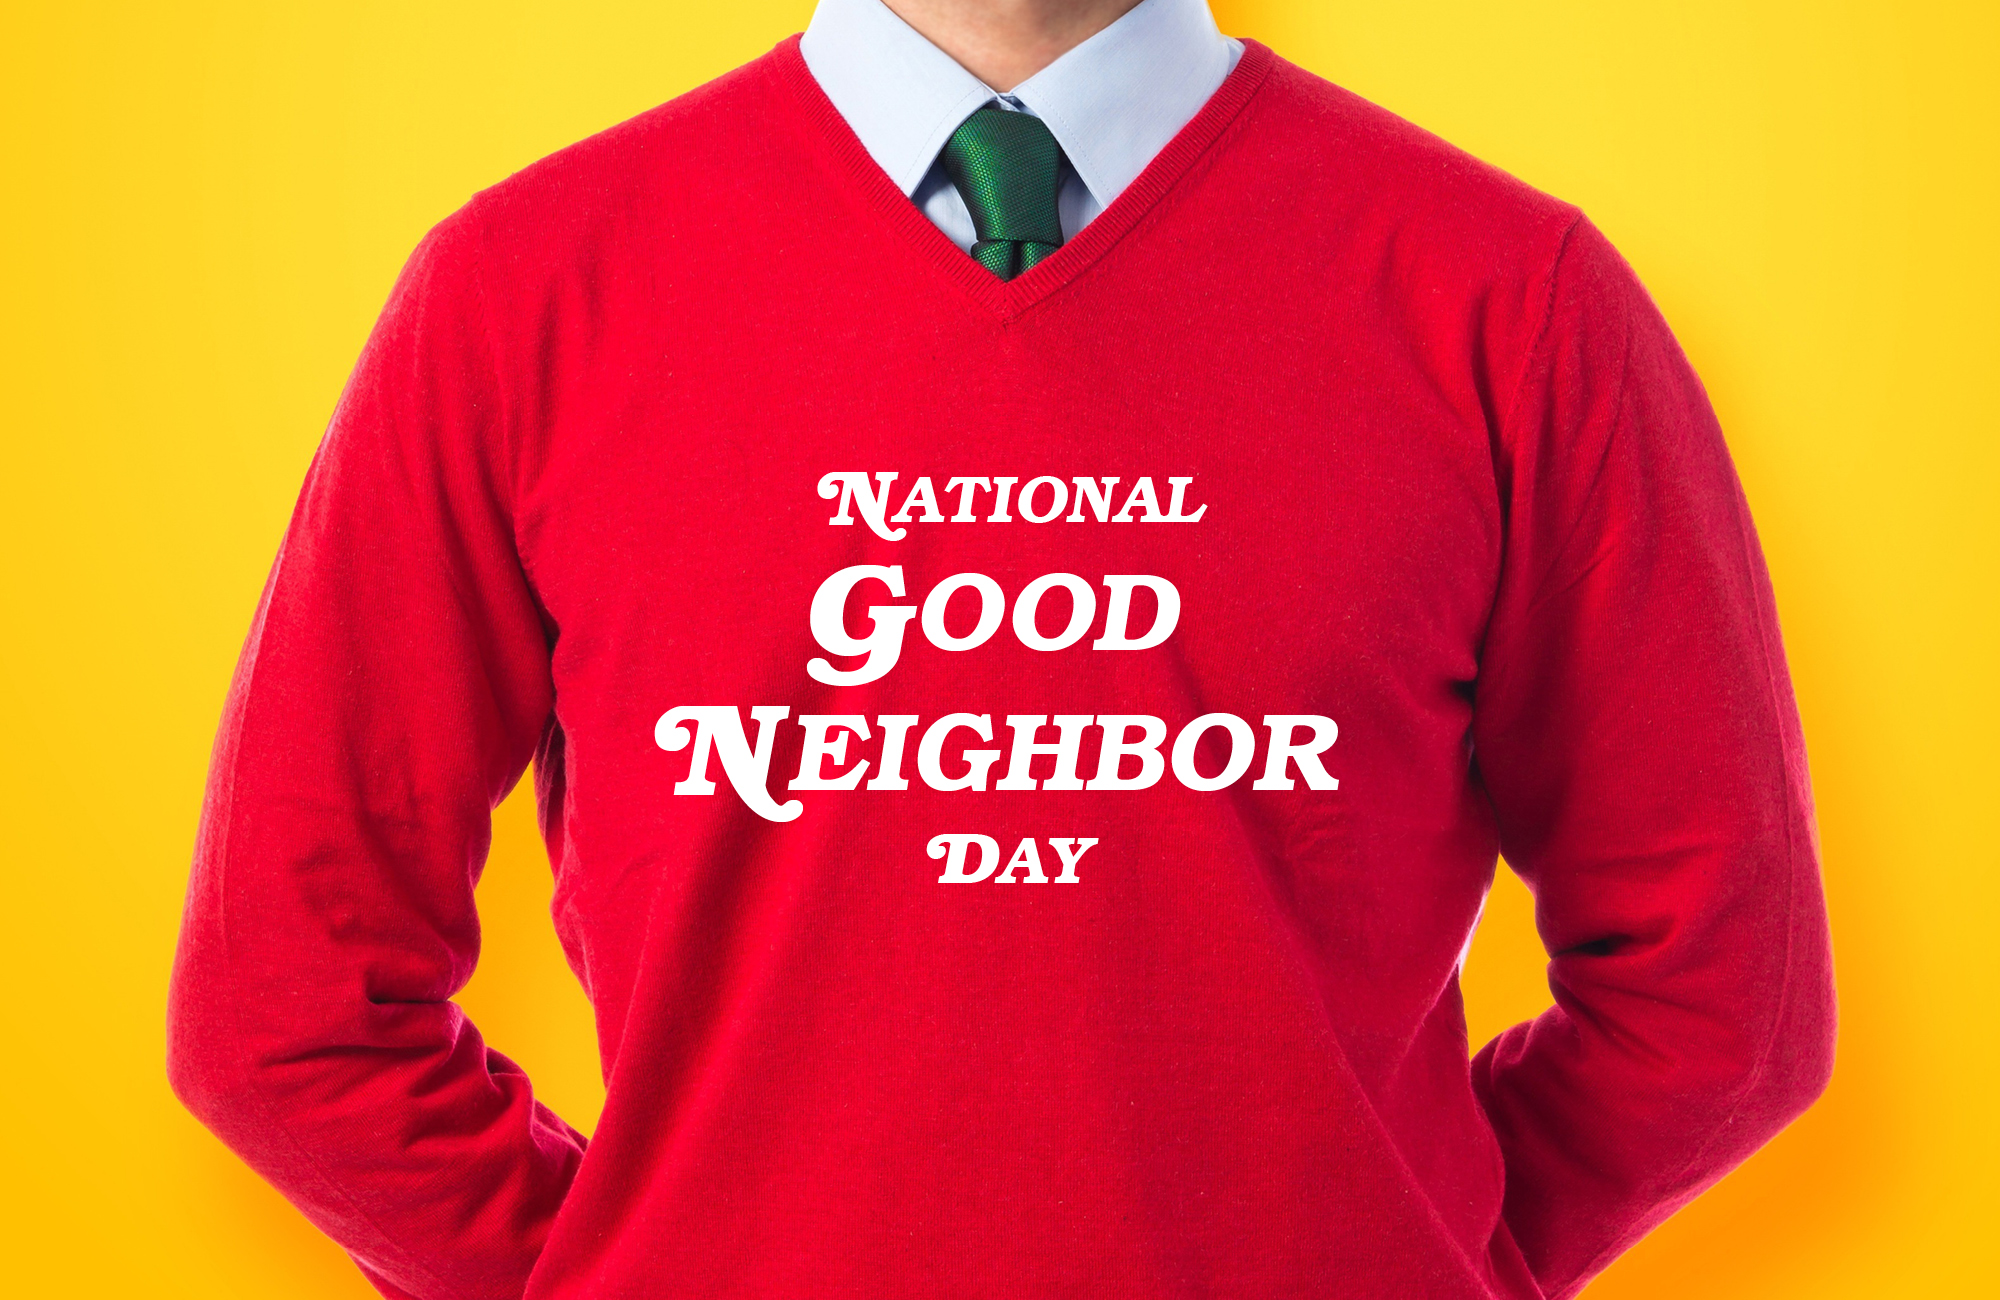 Want to be a good neighbor? Follow these 7 good-neighbor guidelines